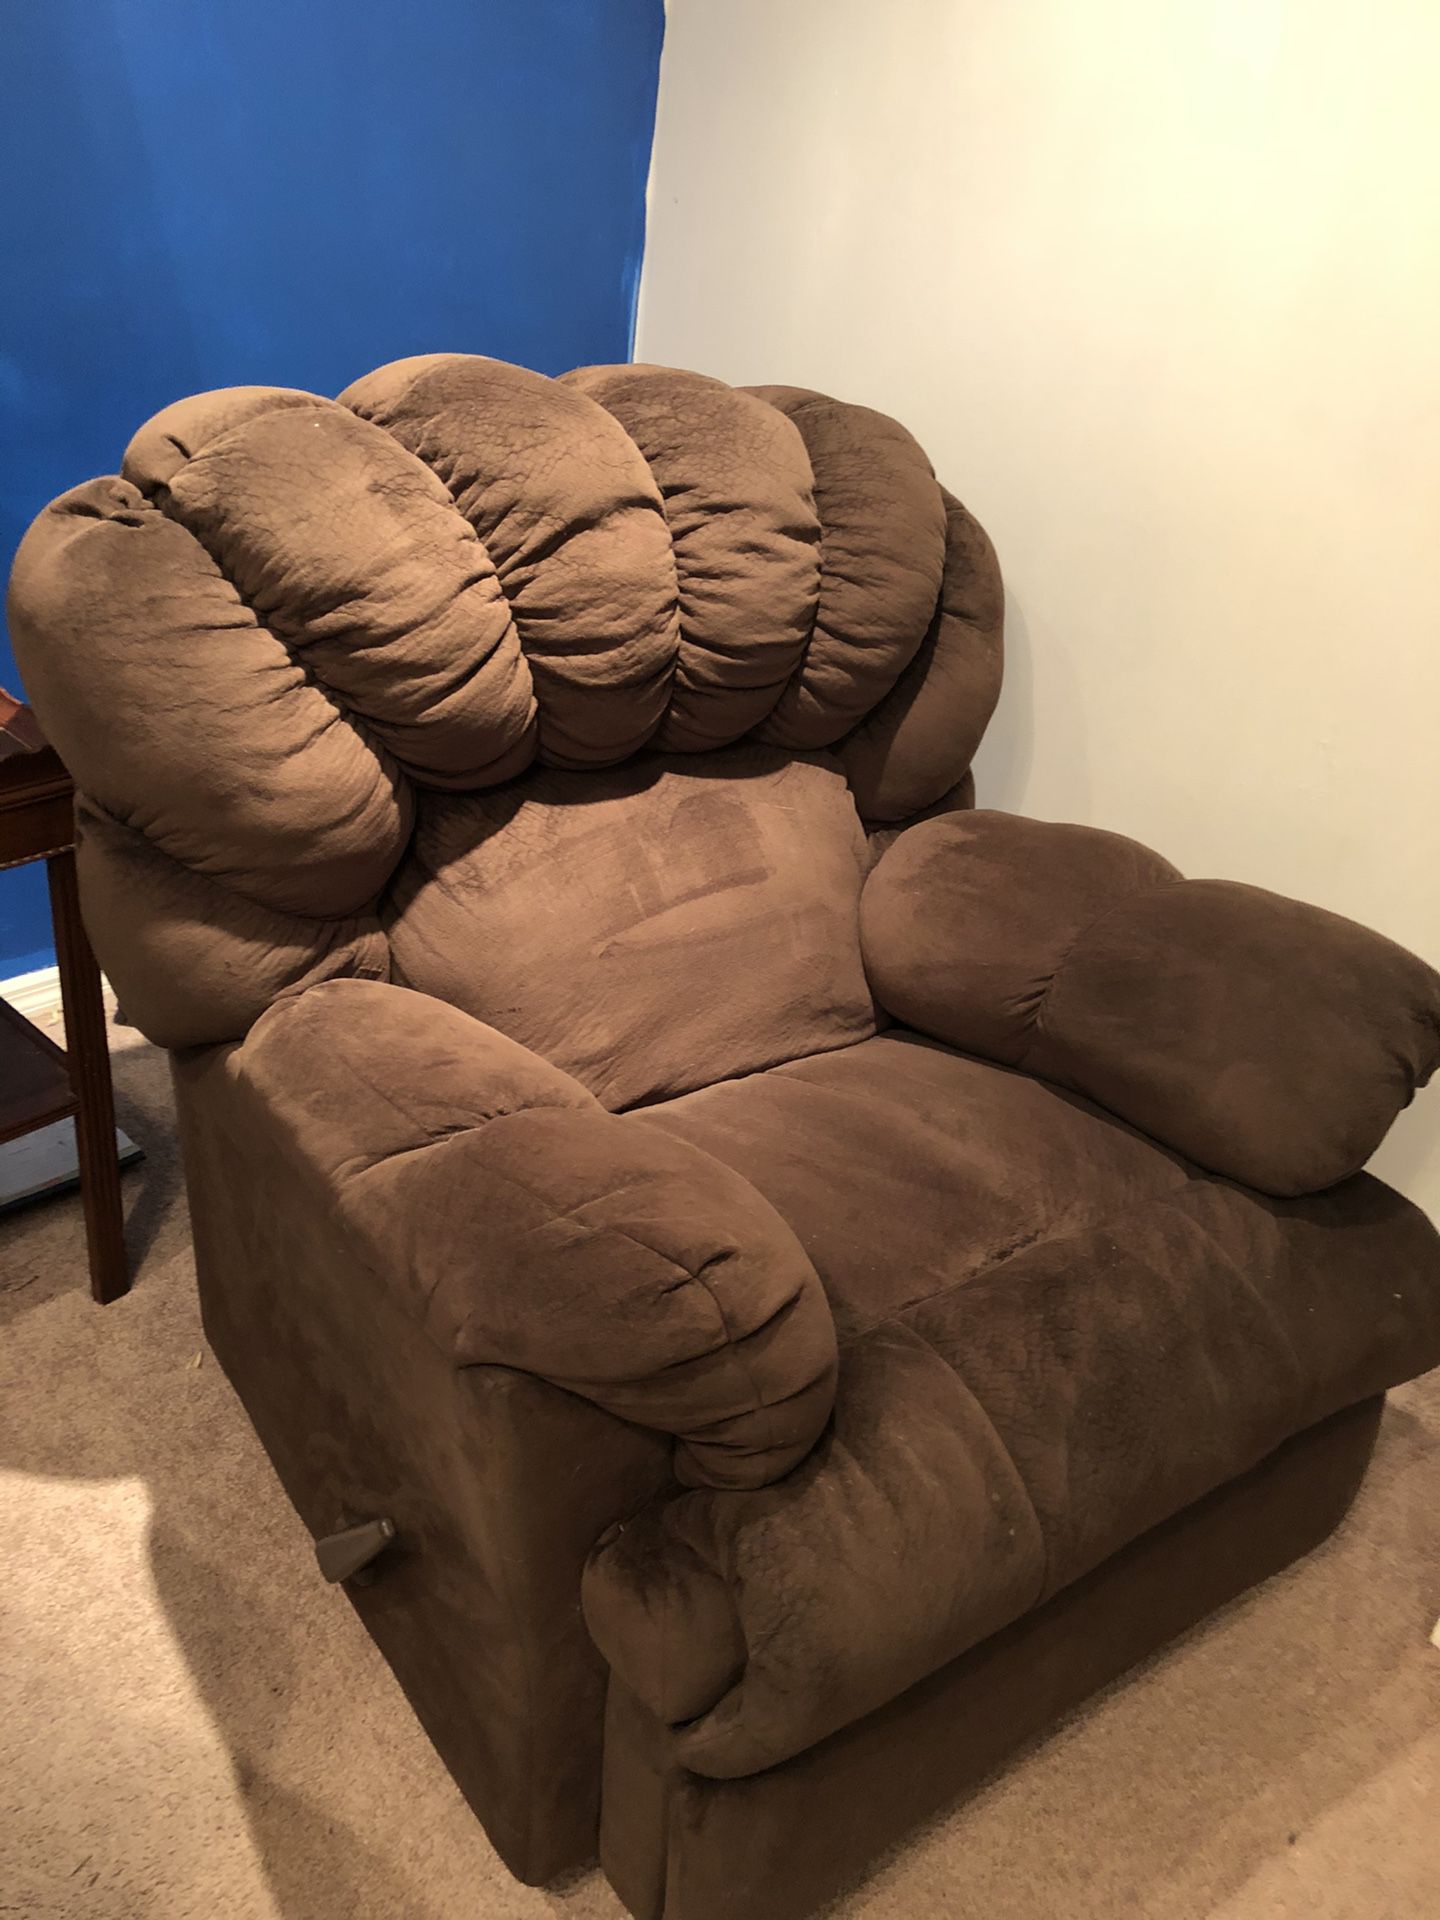 over-sized recliner